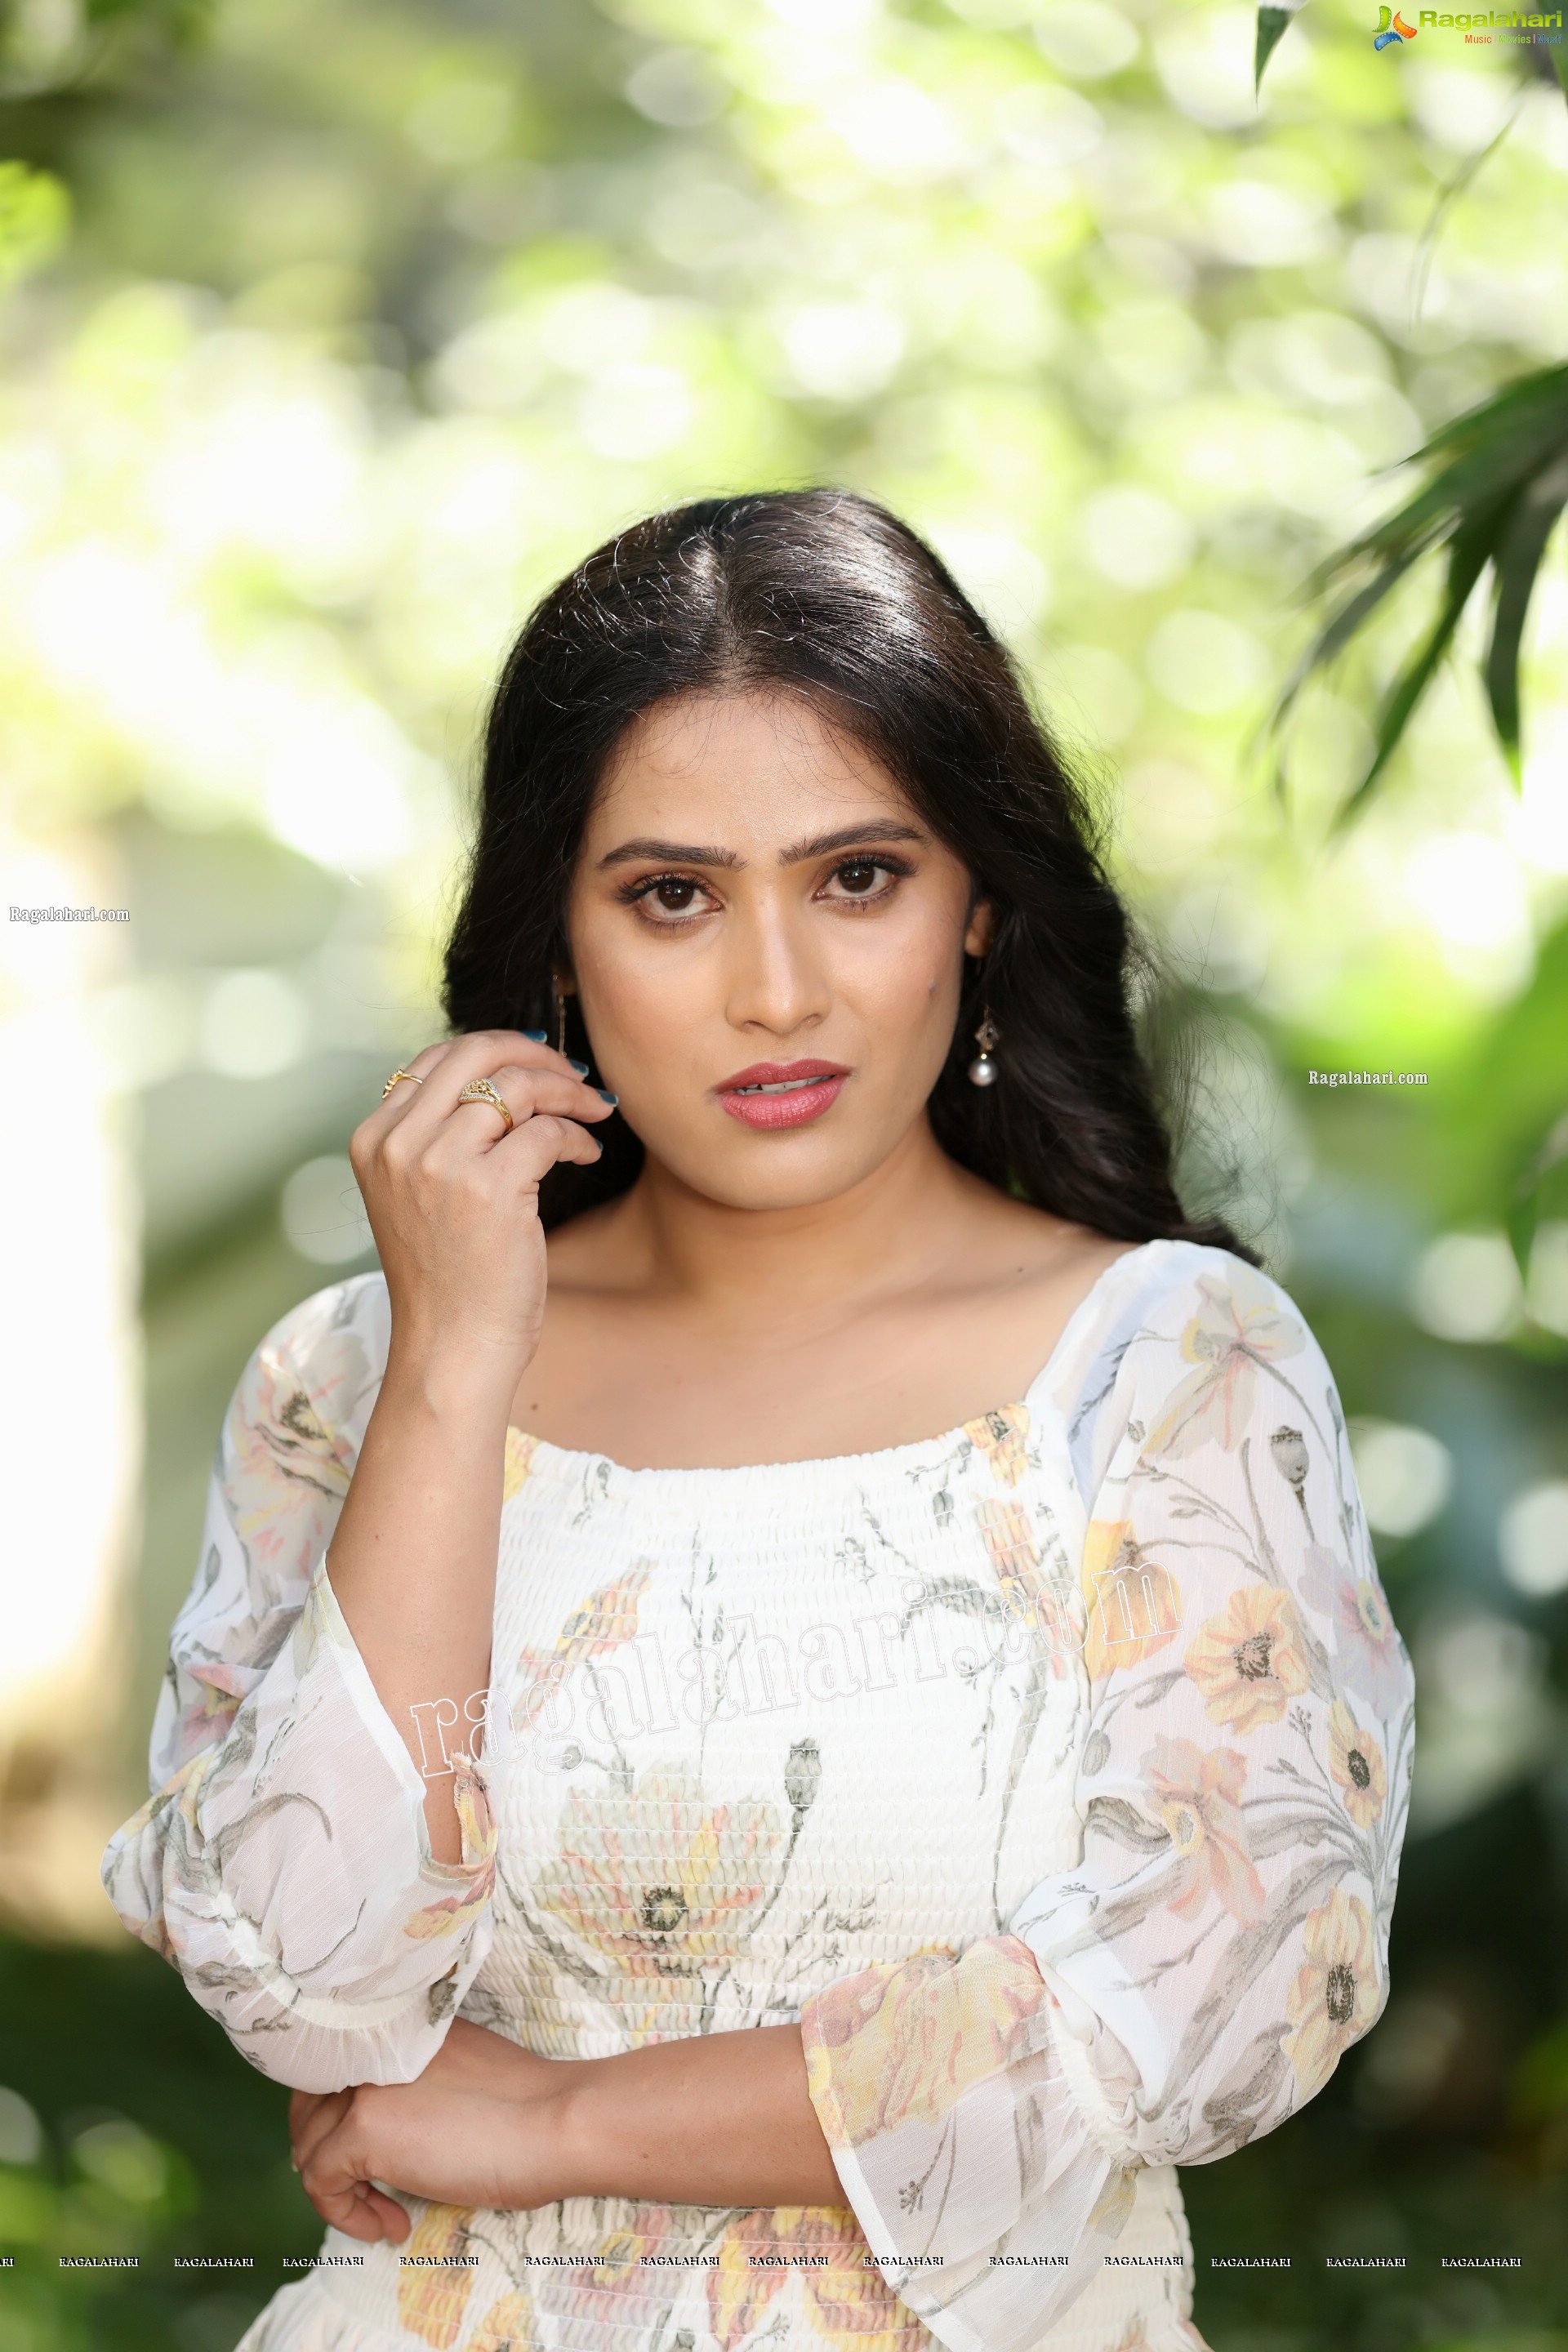 Anusha Parada in Pink Skirt and White Floral Top Exclusive Photo Shoot